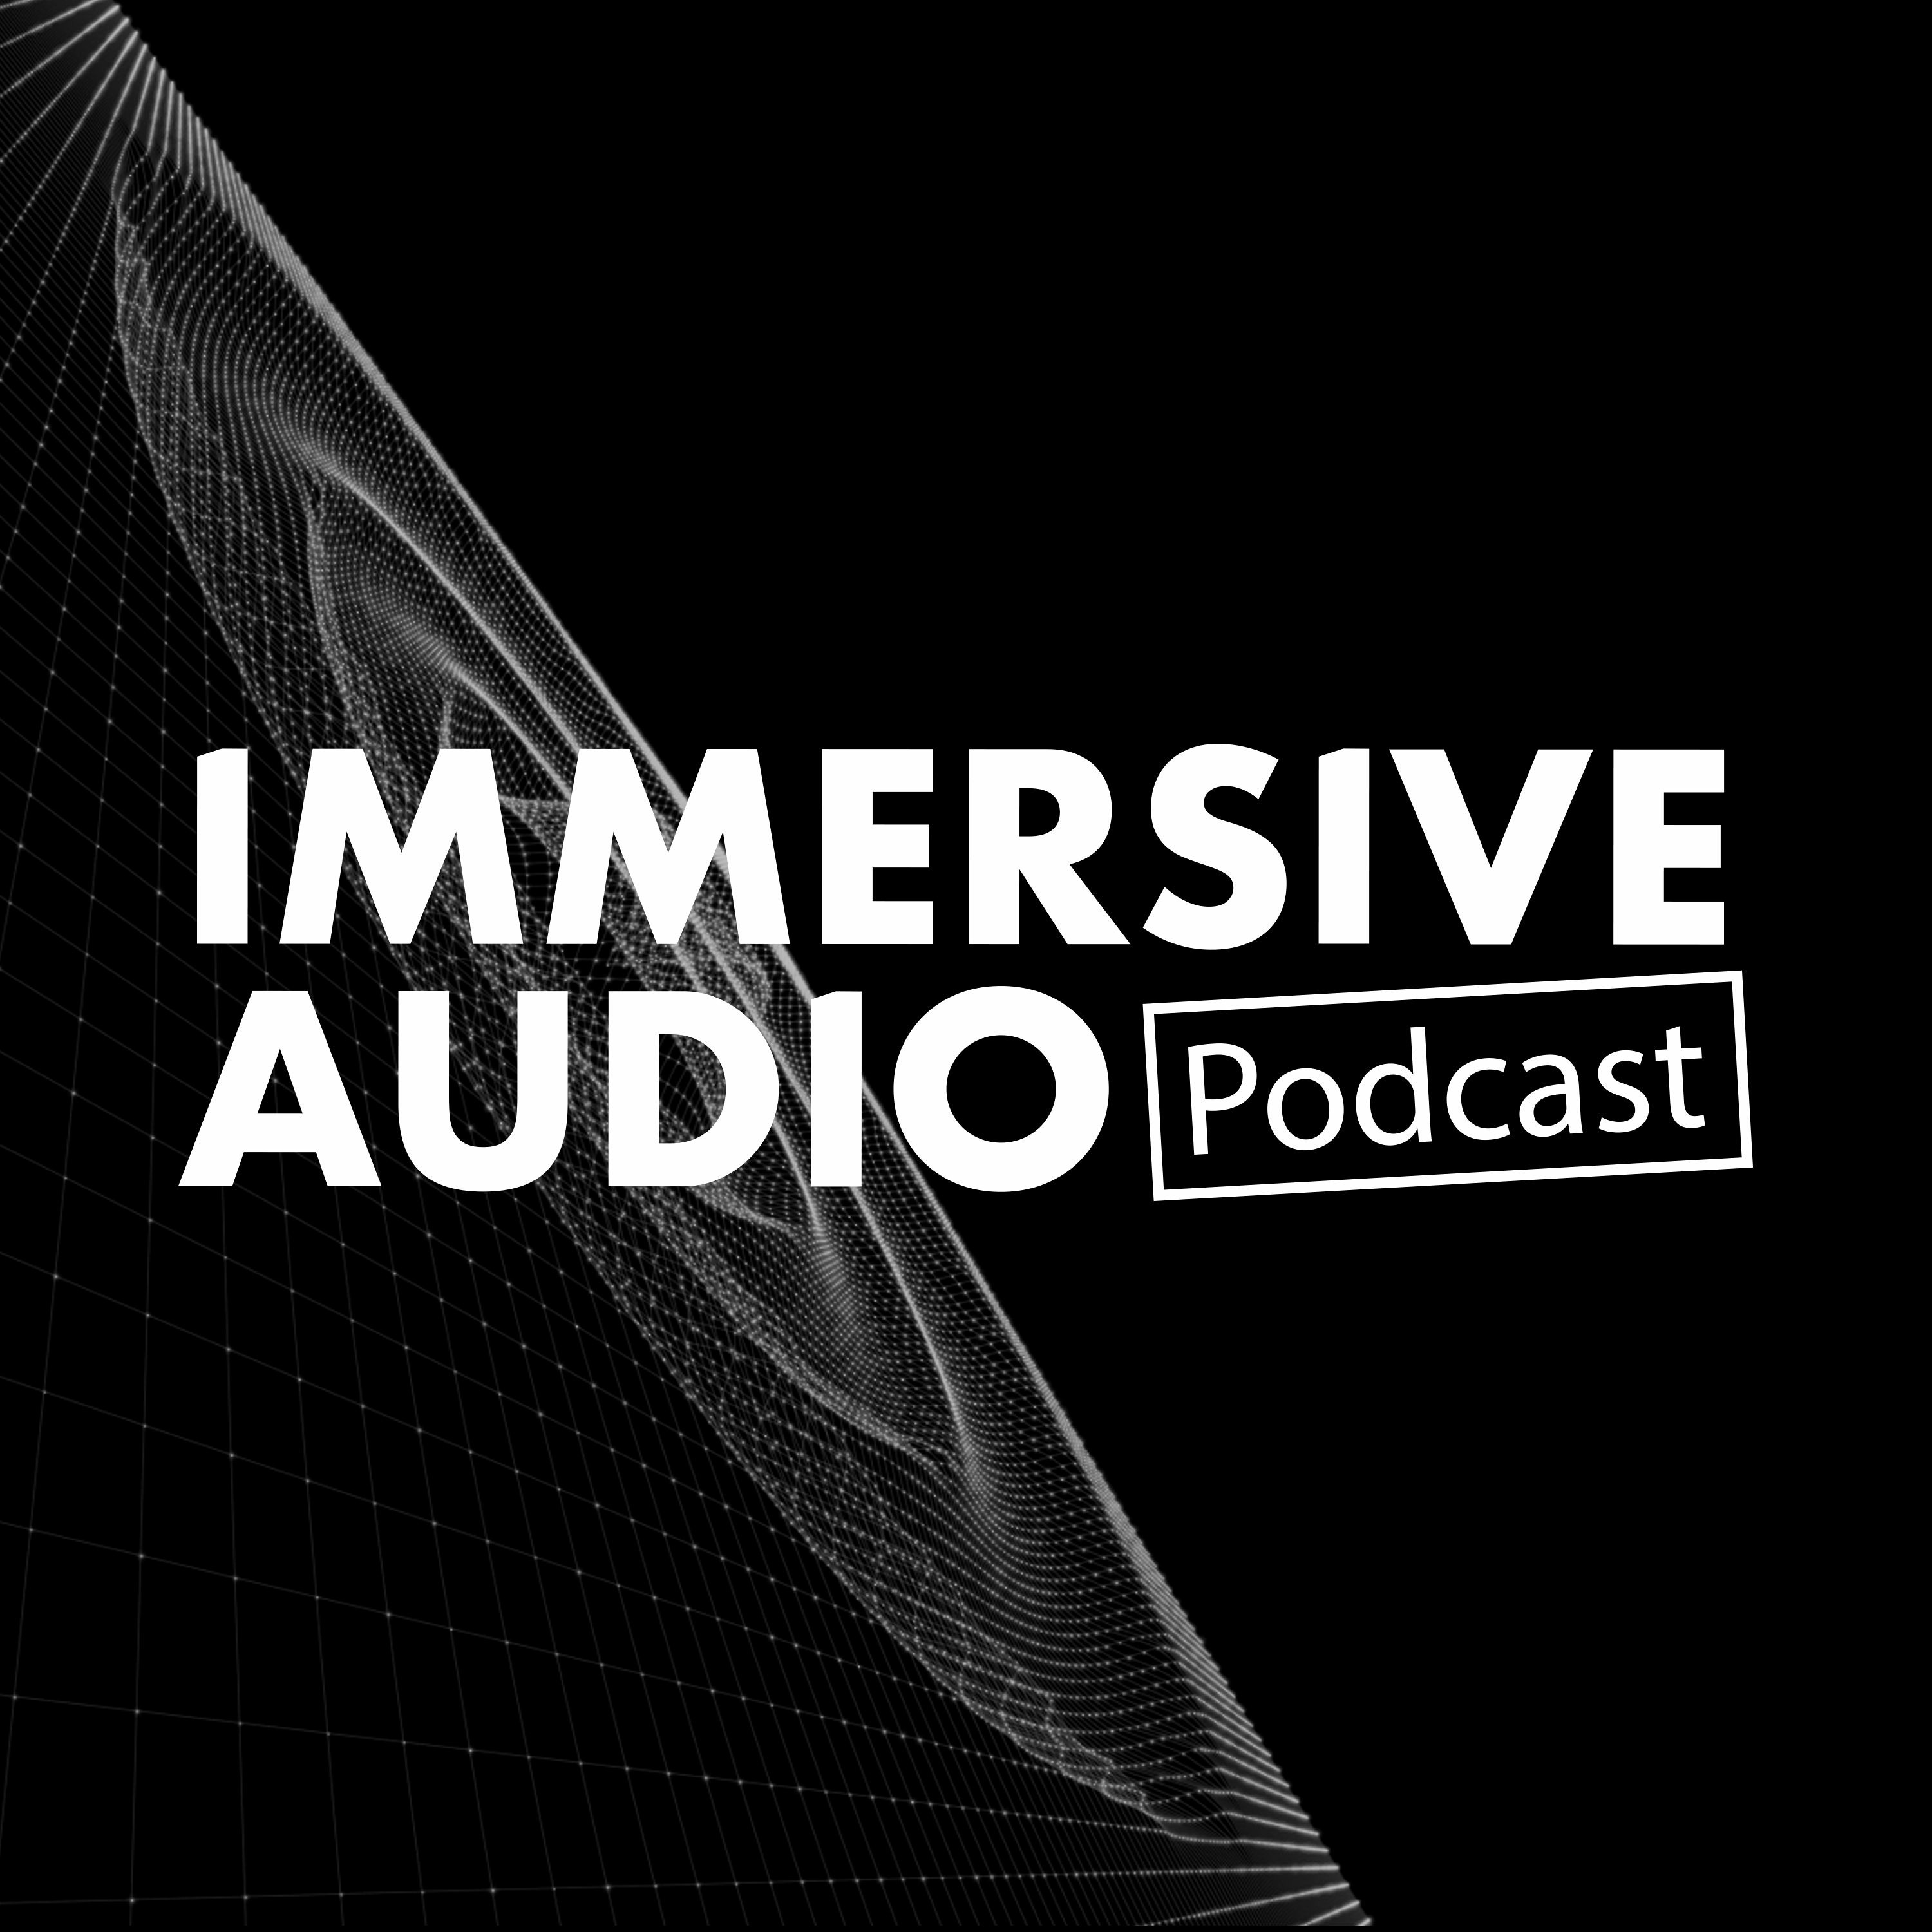 Immersive Audio Podcast Episode 41 Charles Spence (University Of Oxford)